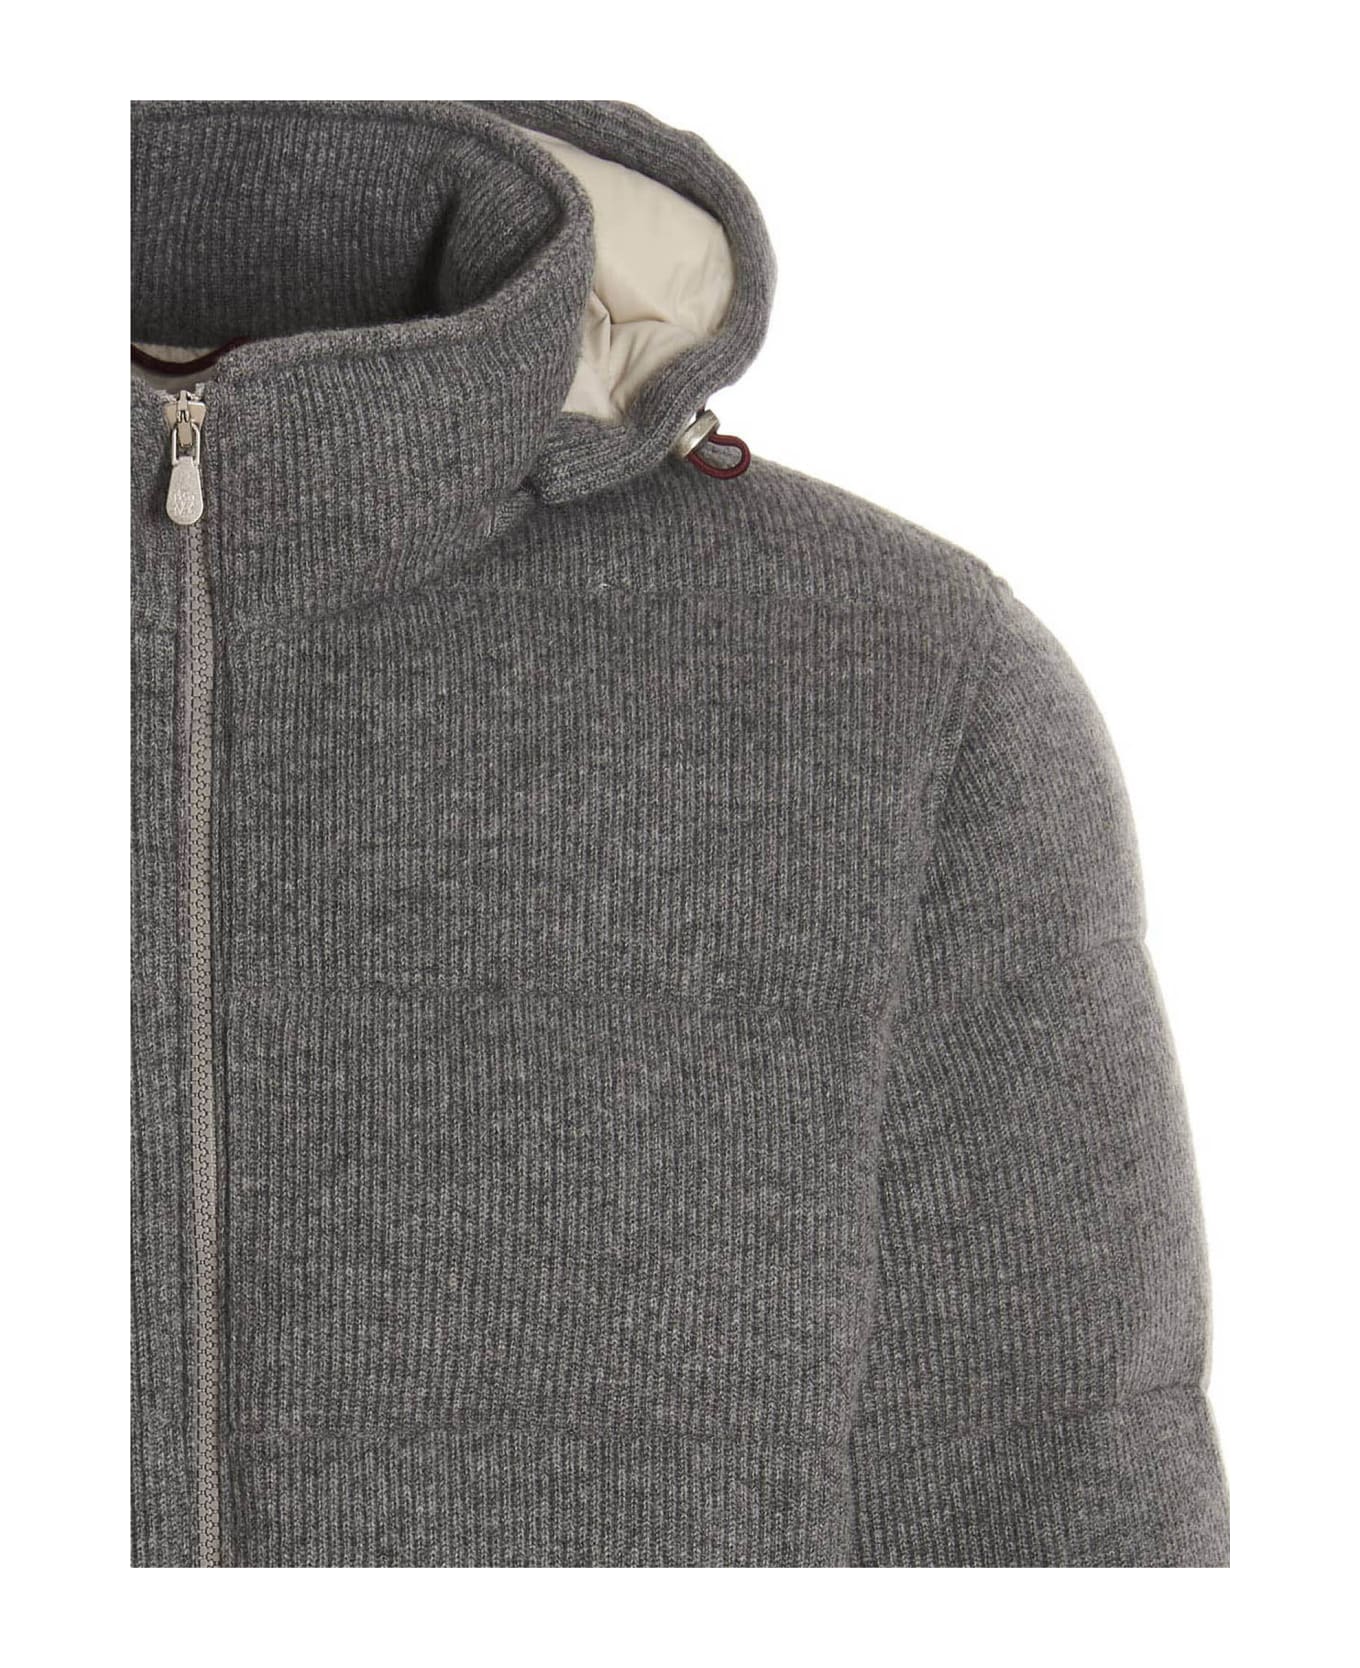 Brunello Cucinelli Ribbed Cashmere Down Jacket - Gray